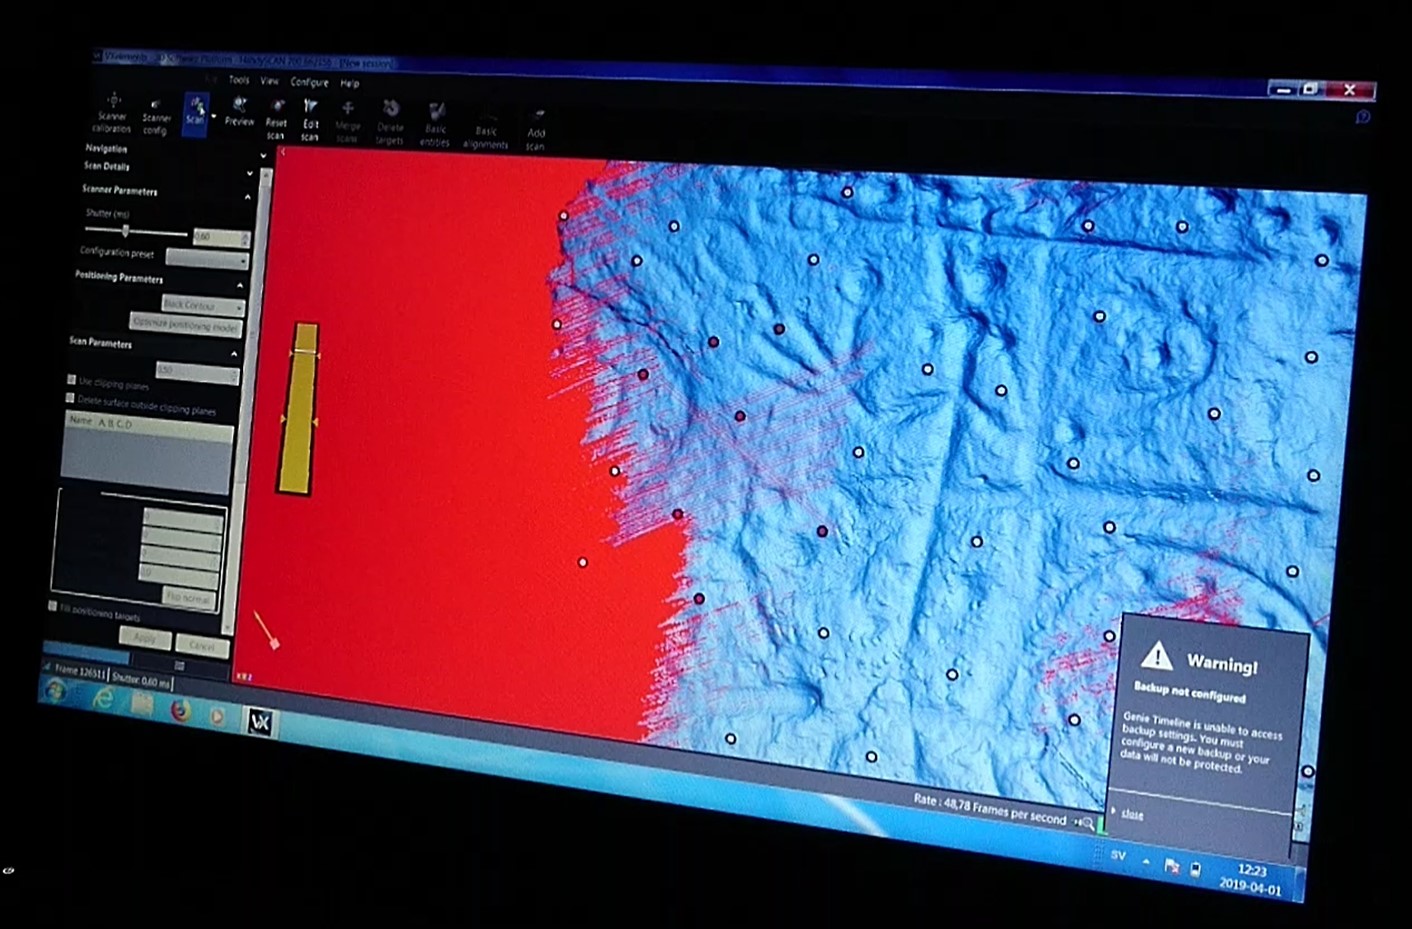 Computer screen showing a terrain model with site distribution points